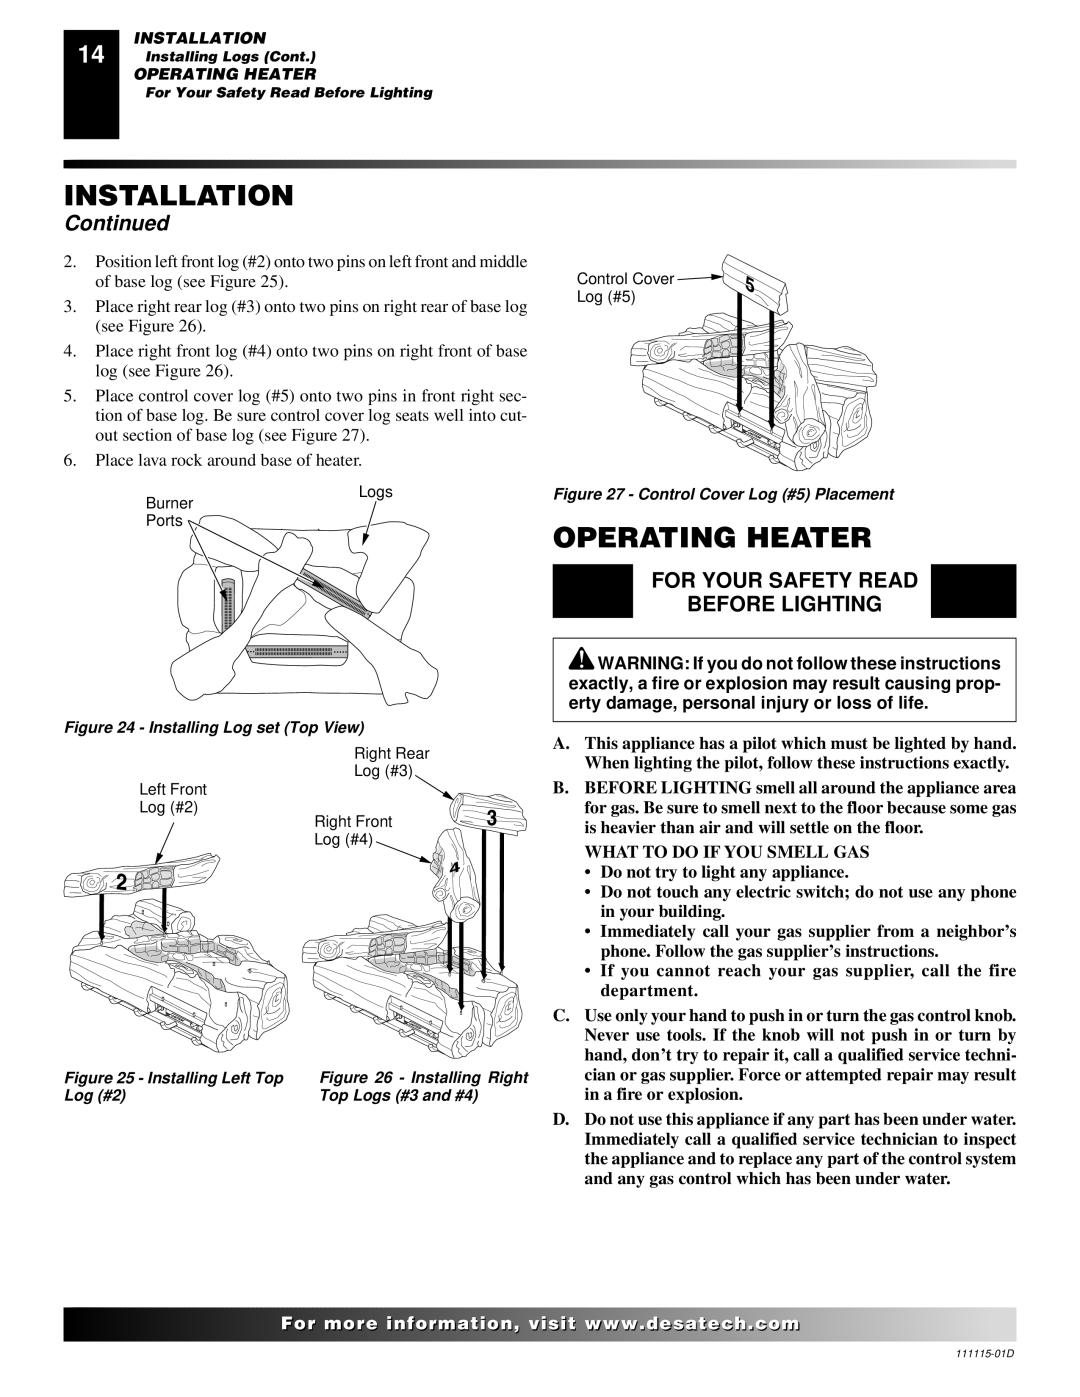 Desa VML27PR installation manual Operating Heater, For Your Safety Read Before Lighting 